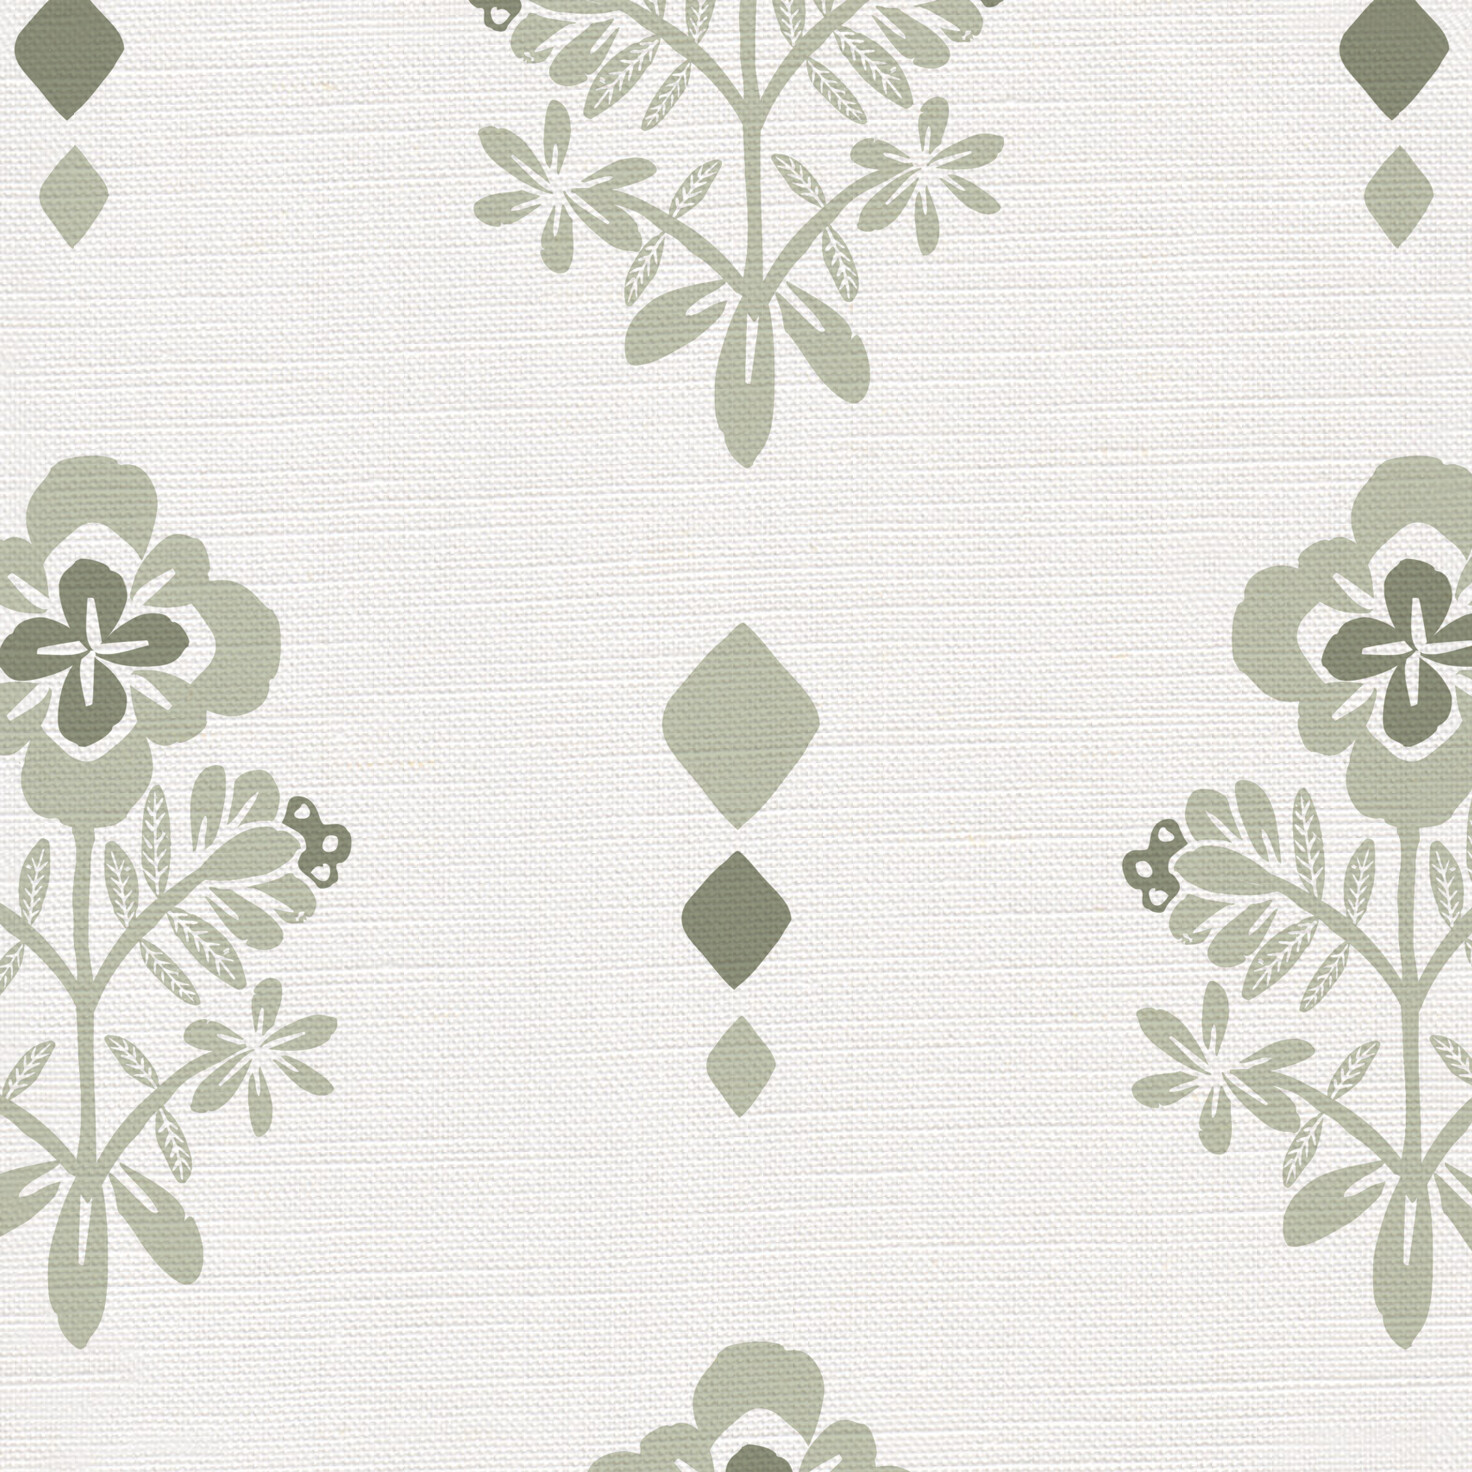 Floret Fabric in Green on a White Background